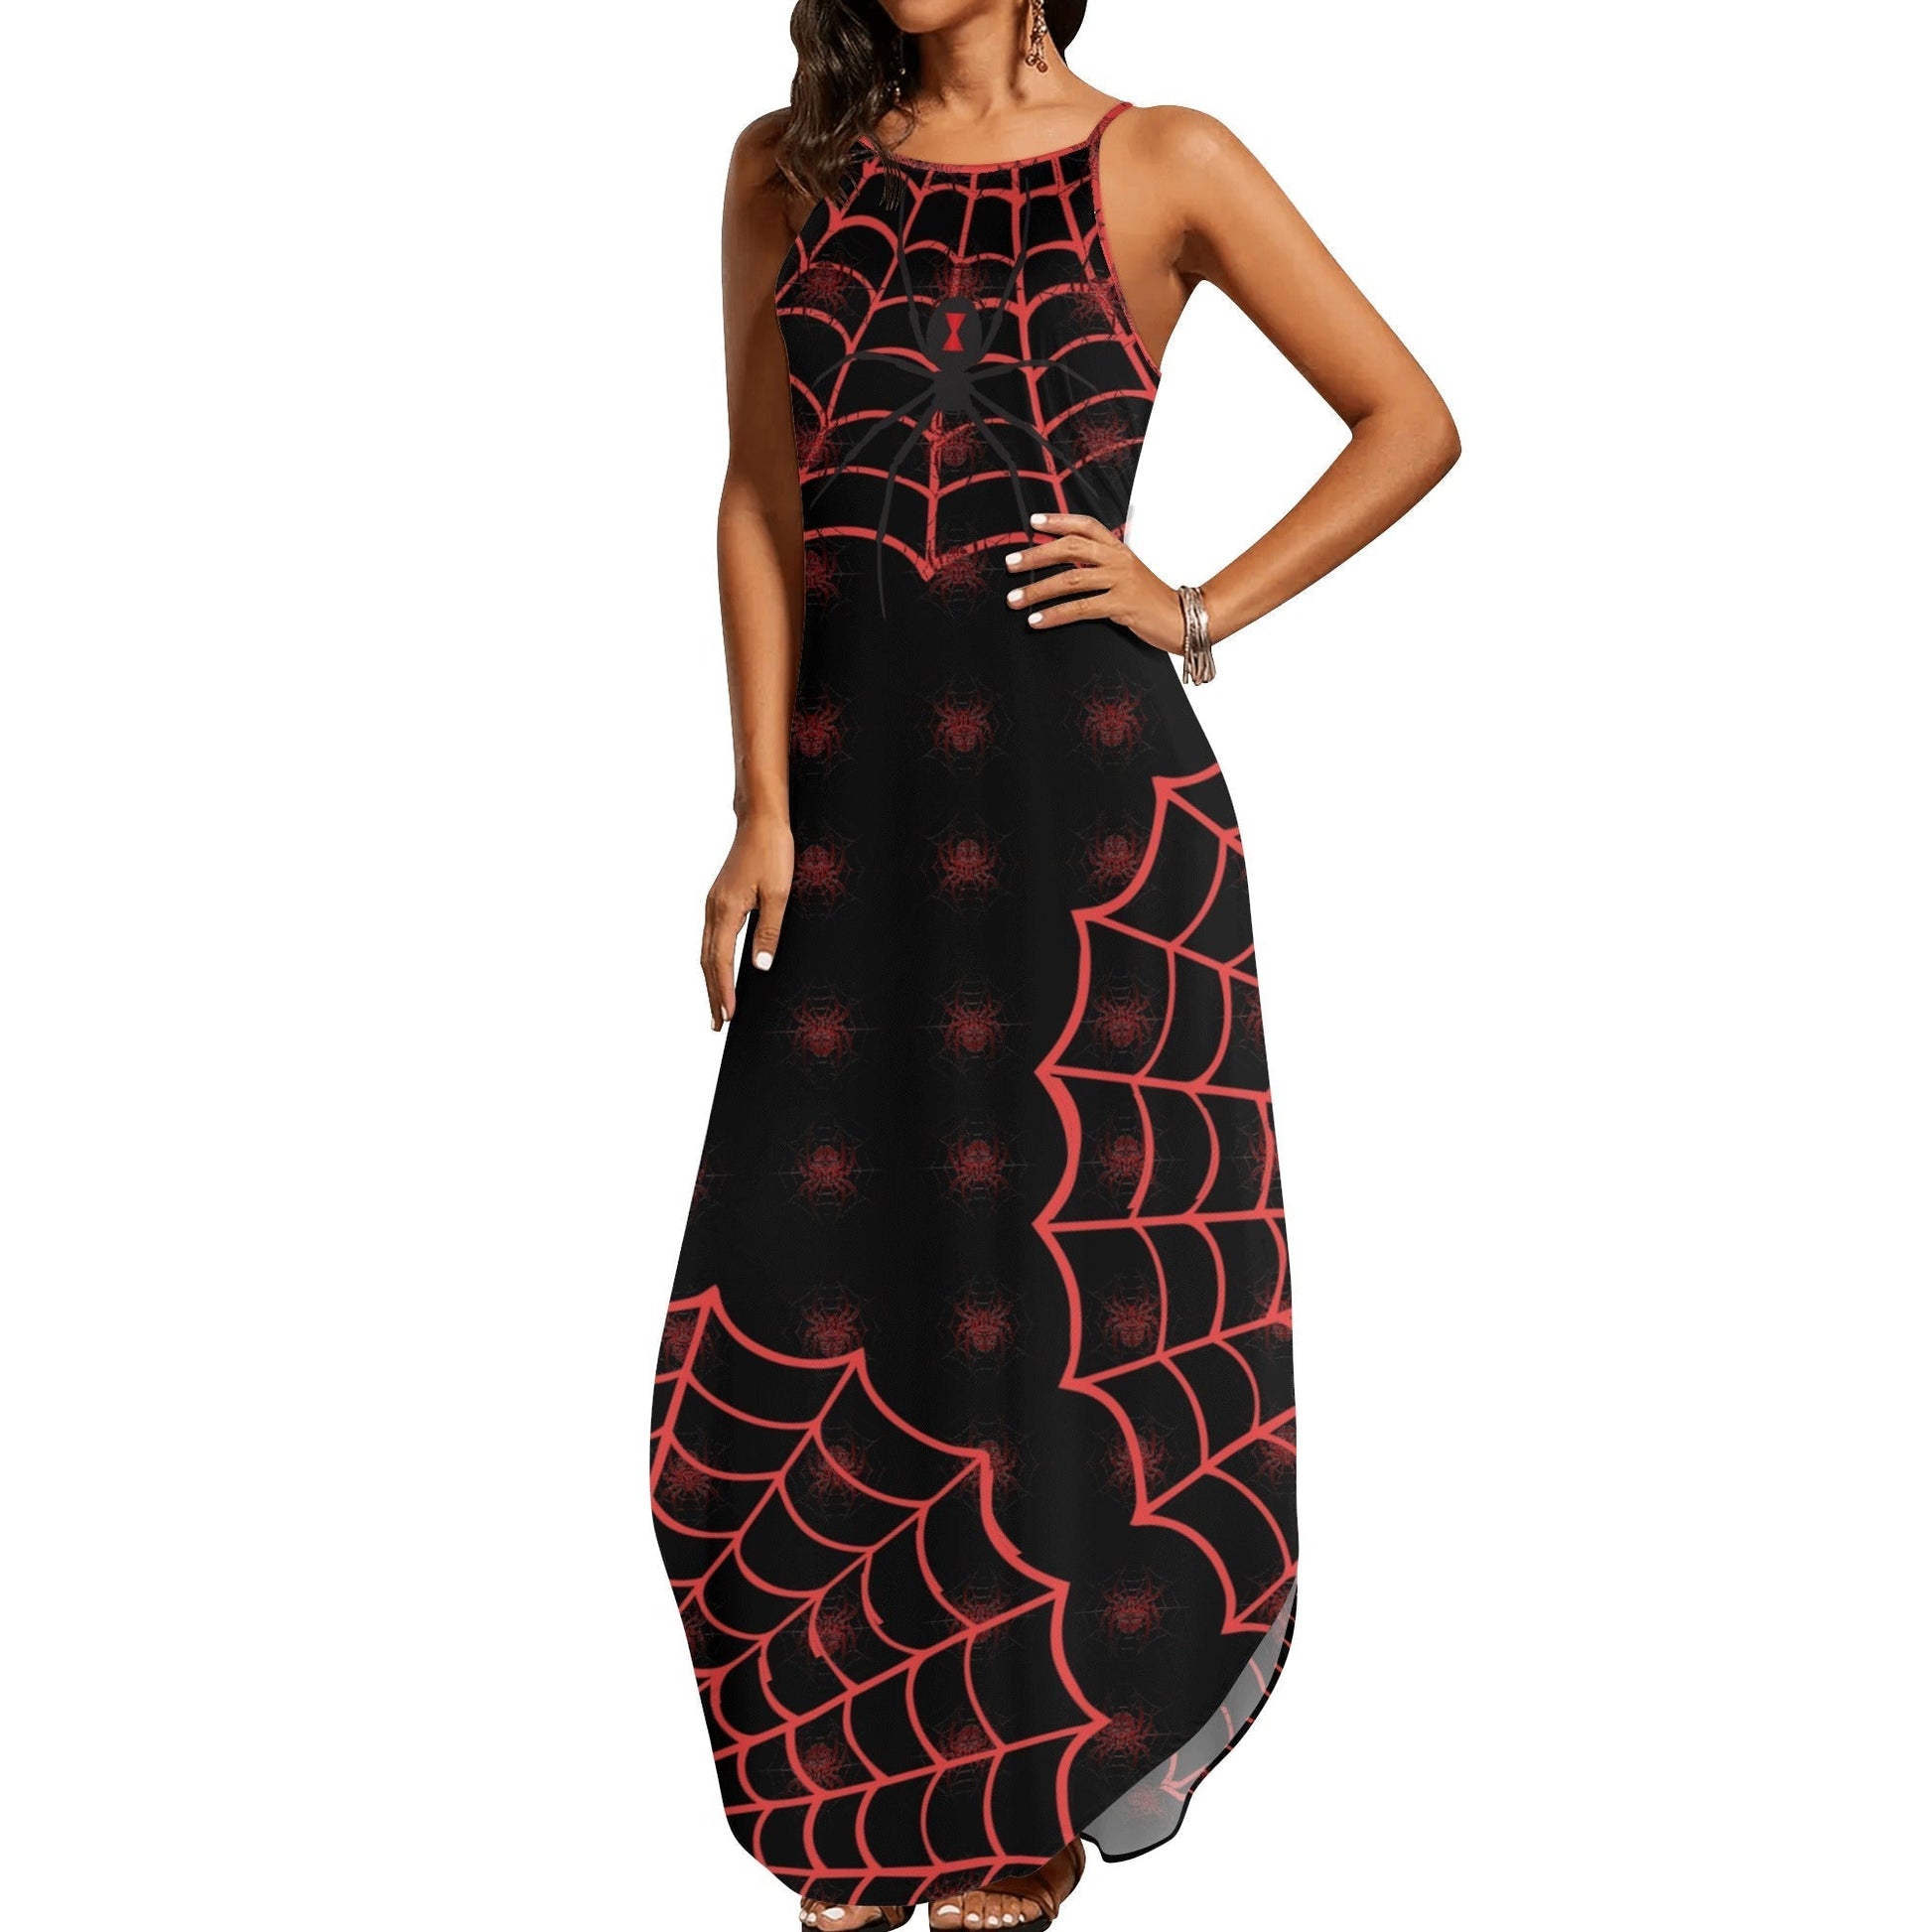 Stand out  with the  Spider Queen Womens Elegant Sleeveless Party Dress  available at Hey Nugget. Grab yours today!